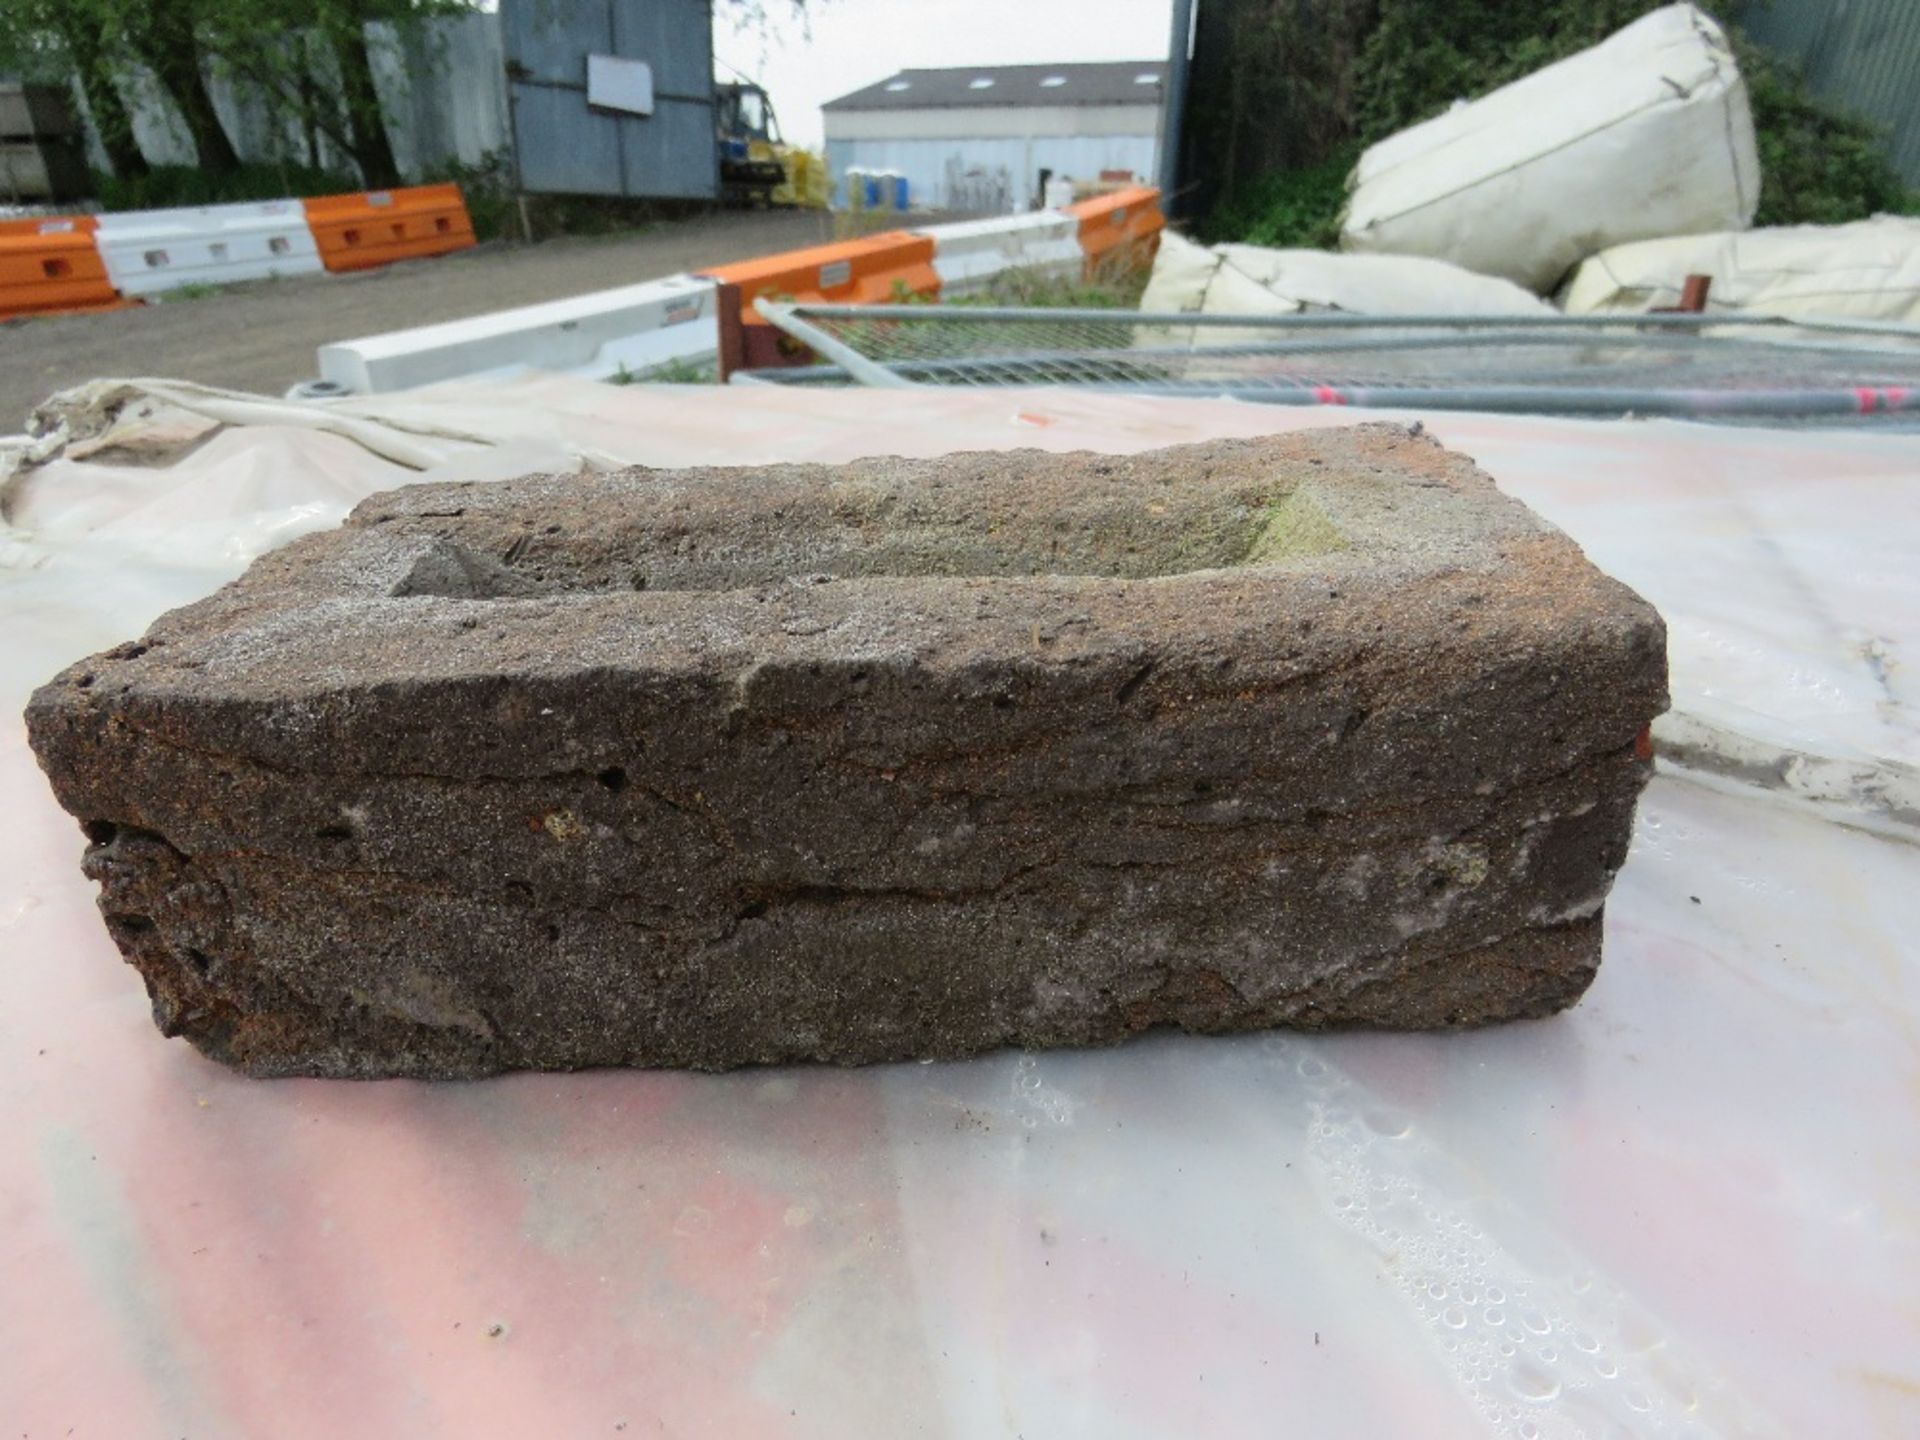 3 X PACKS OF RUSHINGTON ANTIQUE (DALI) BRICKS, CODE T33. BELIEVED TO BE 730NO IN EACH PACK. THIS - Image 13 of 17